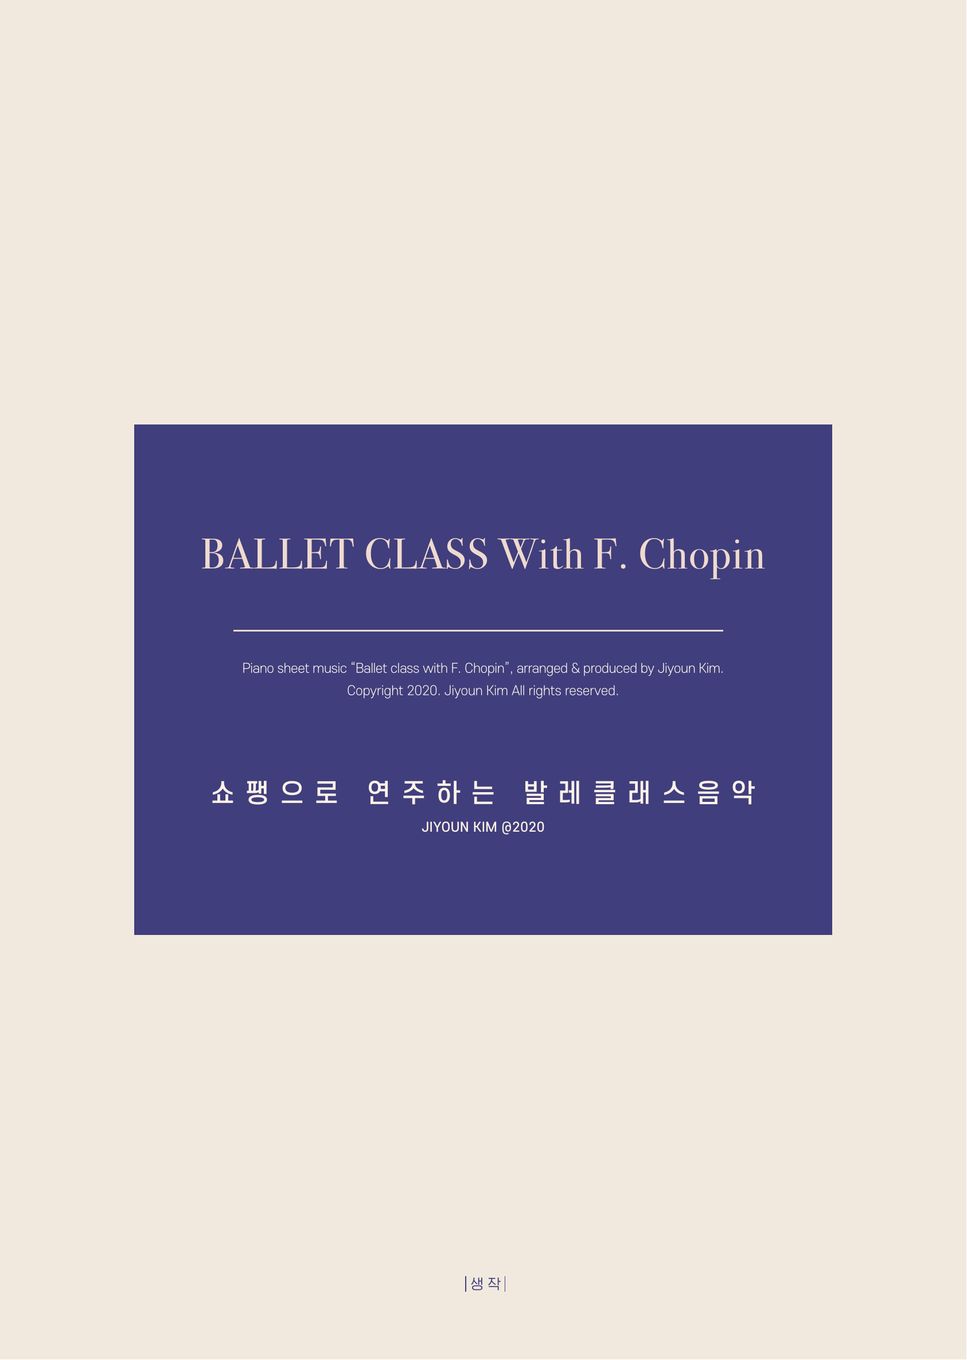 F. Chopin - Ballet Class with F. Chopin - 13. Grand battements jetes by Jiyoun KIM